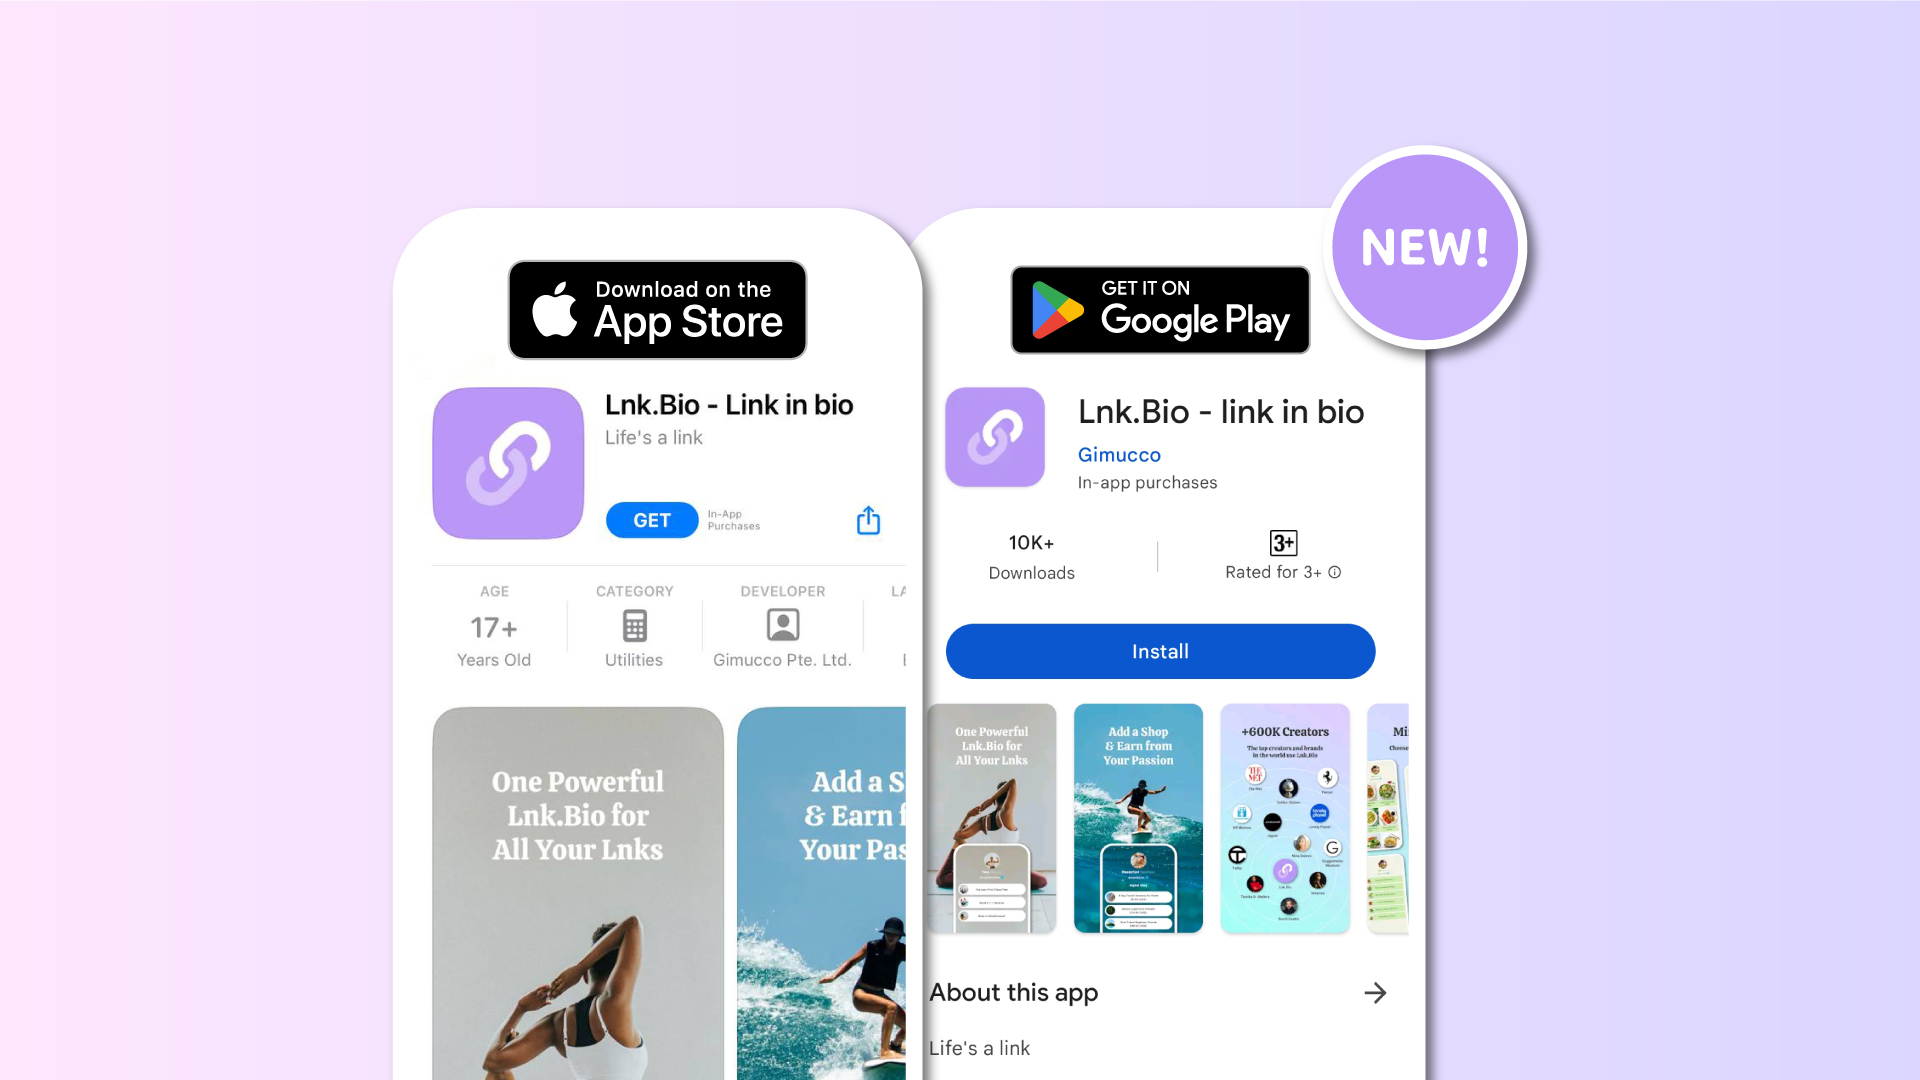 Lnk.Bio Mobile Apps Update: iOS 1.8 and Android 1.3